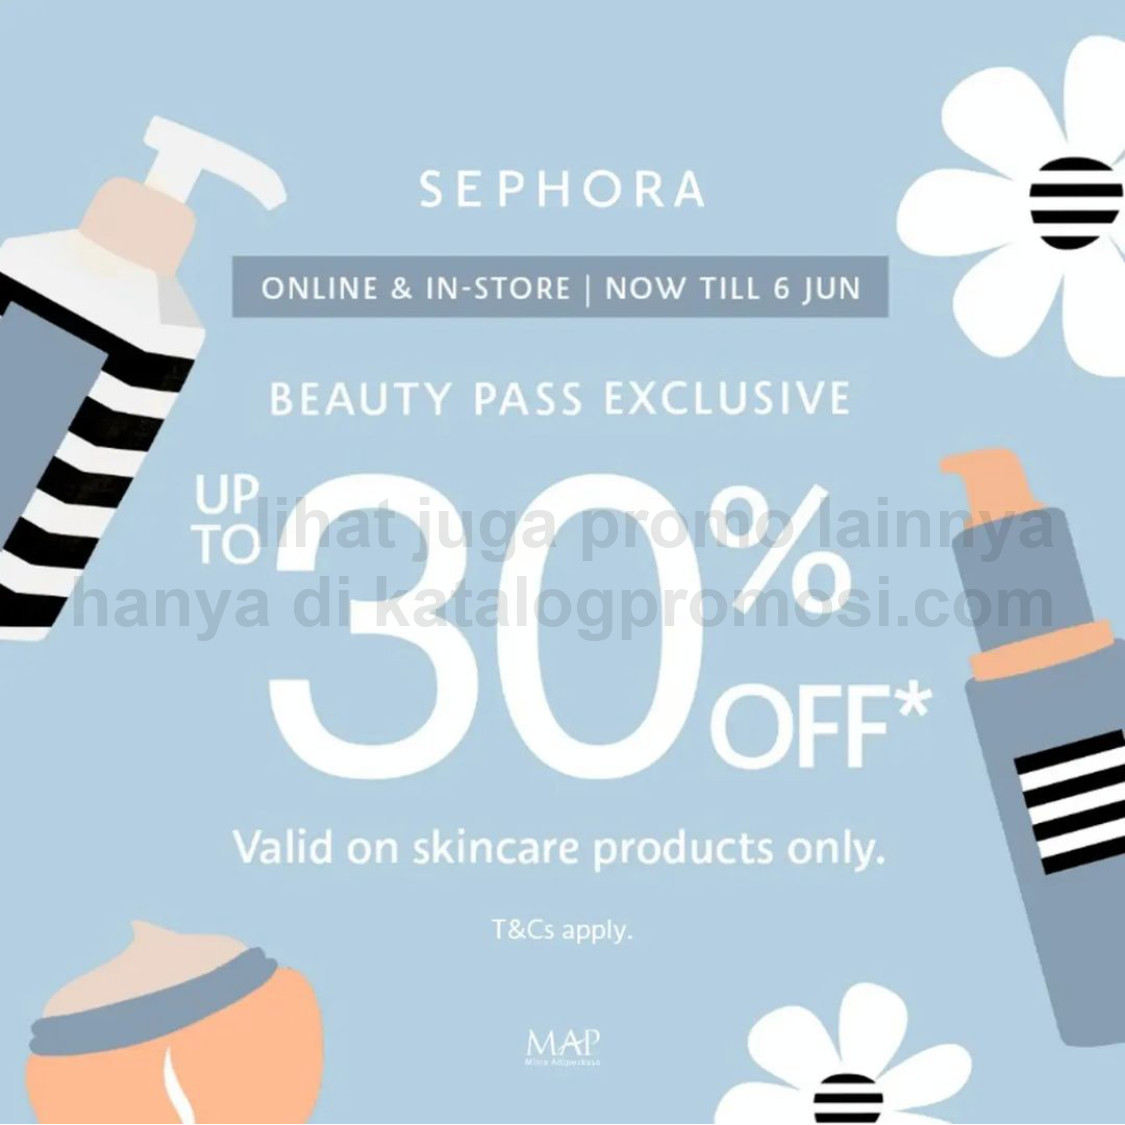 PROMO SEPHORA BEAUTY PASS EXCLUSIVE -  UP TO 30% OFF selected skincare products